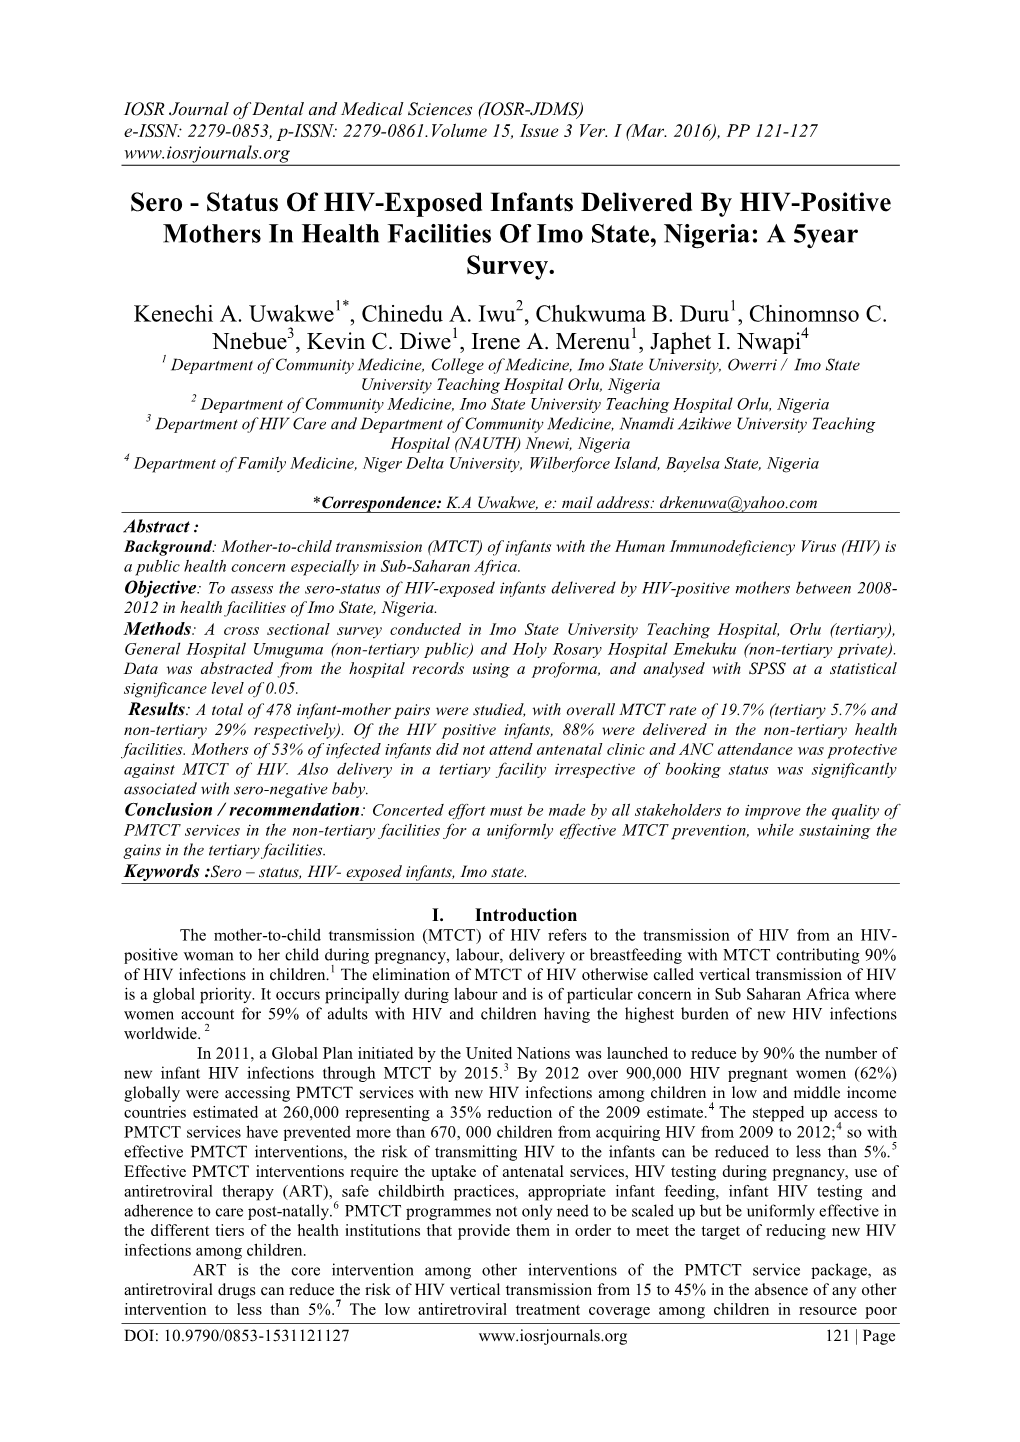 Sero - Status of HIV-Exposed Infants Delivered by HIV-Positive Mothers in Health Facilities of Imo State, Nigeria: a 5Year Survey